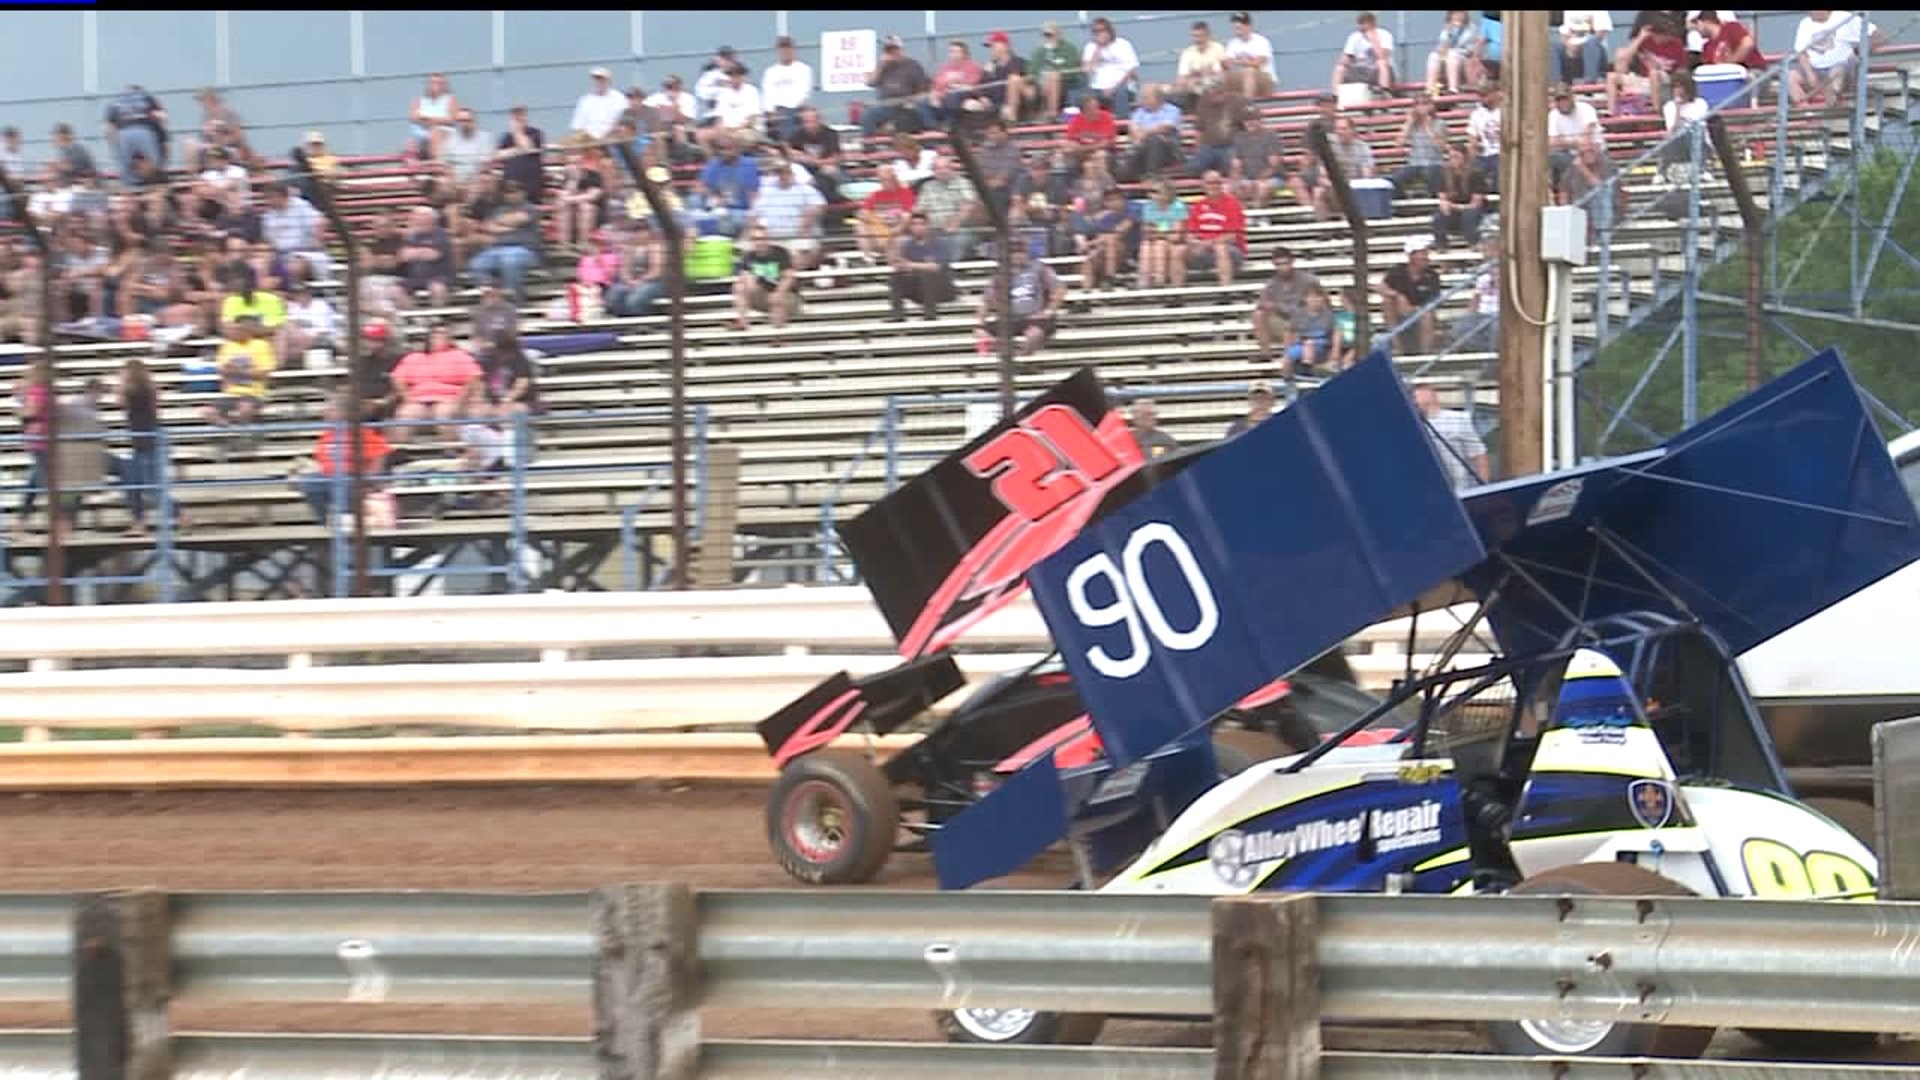 History of Williams Grove Speedway